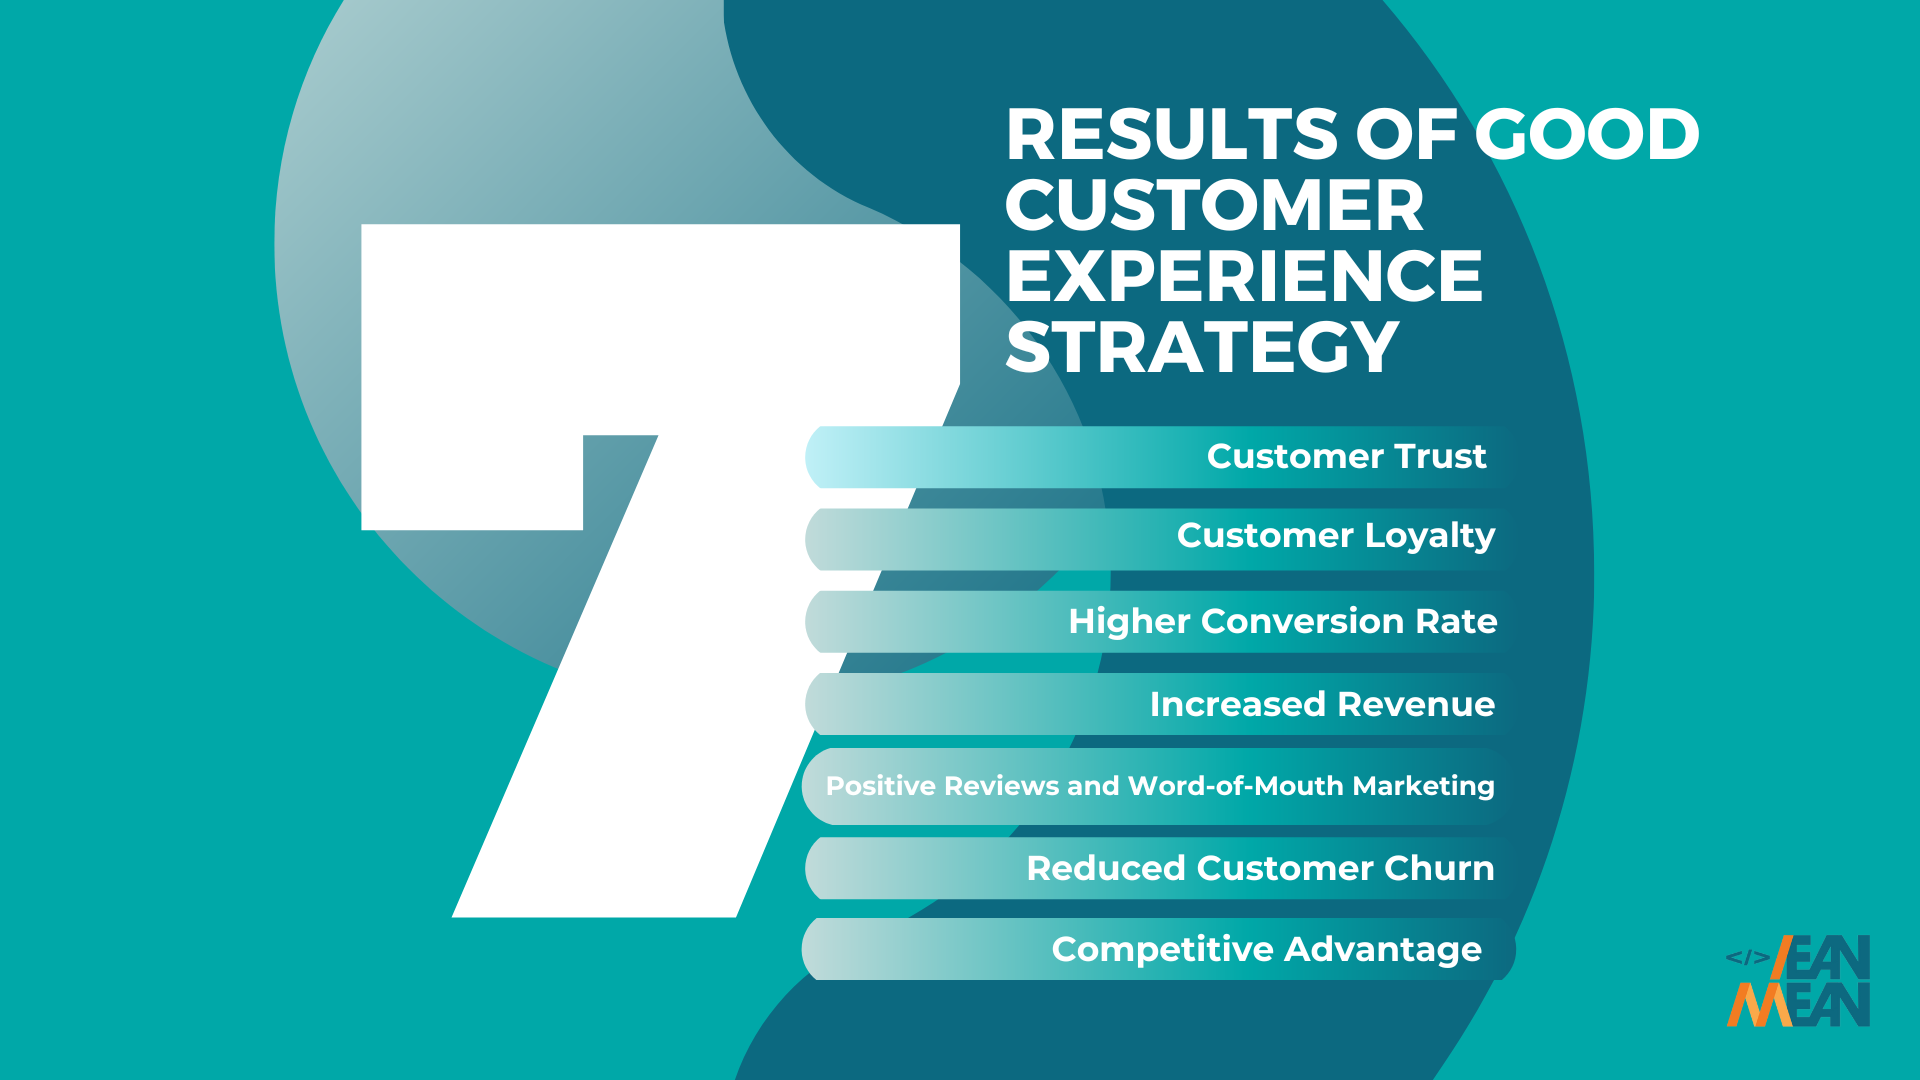 Data Visualization showing the result of good customer experience strategy statistics